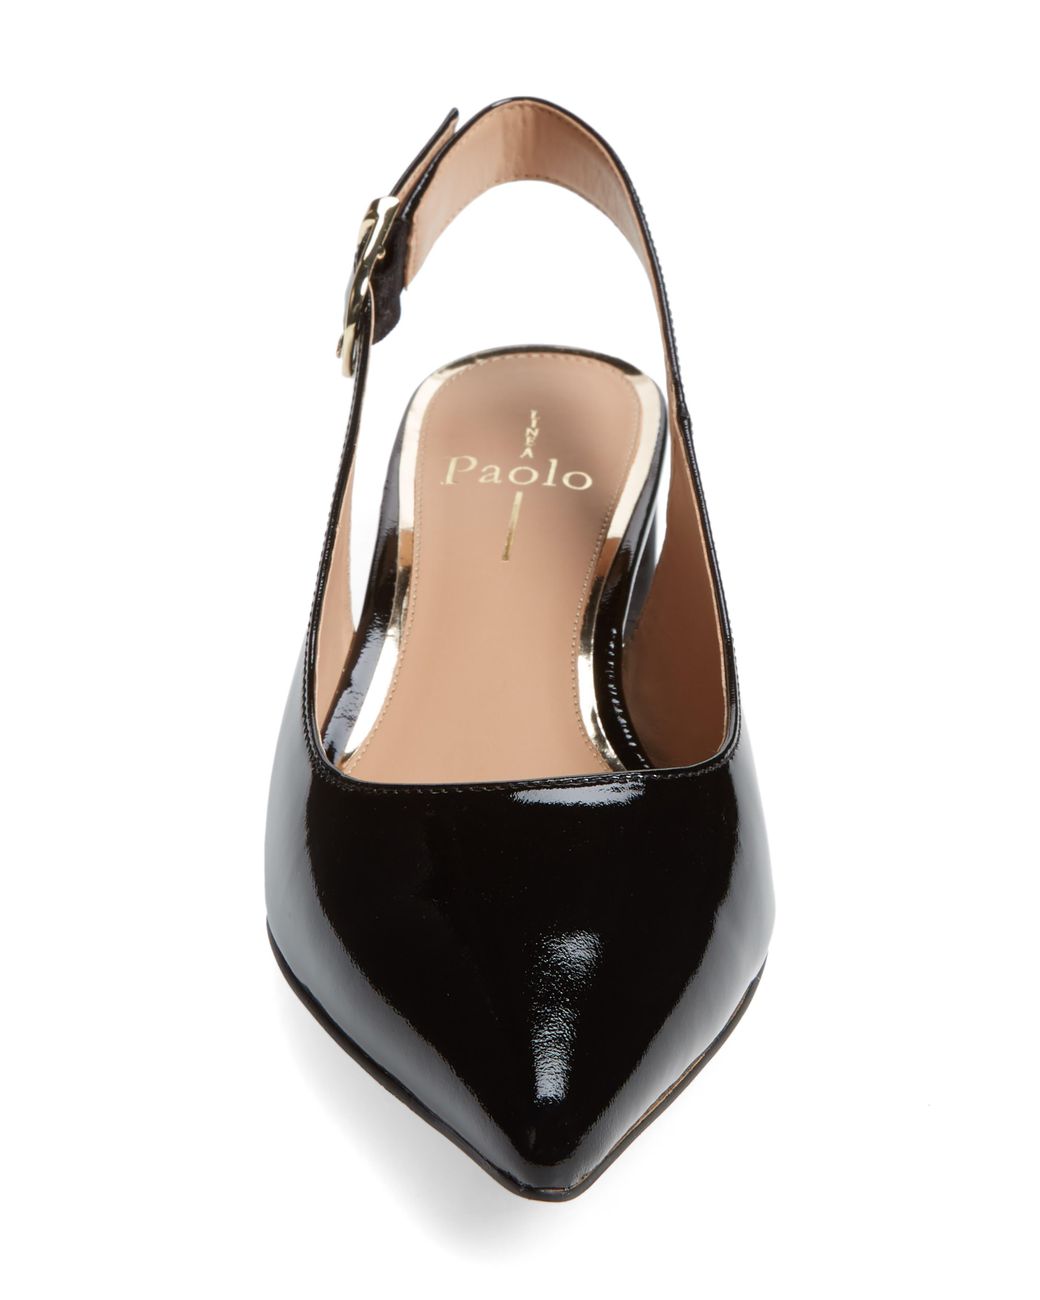 Linea Paolo Cella Slingback Pump In Black Patent Leather At Nordstrom ...